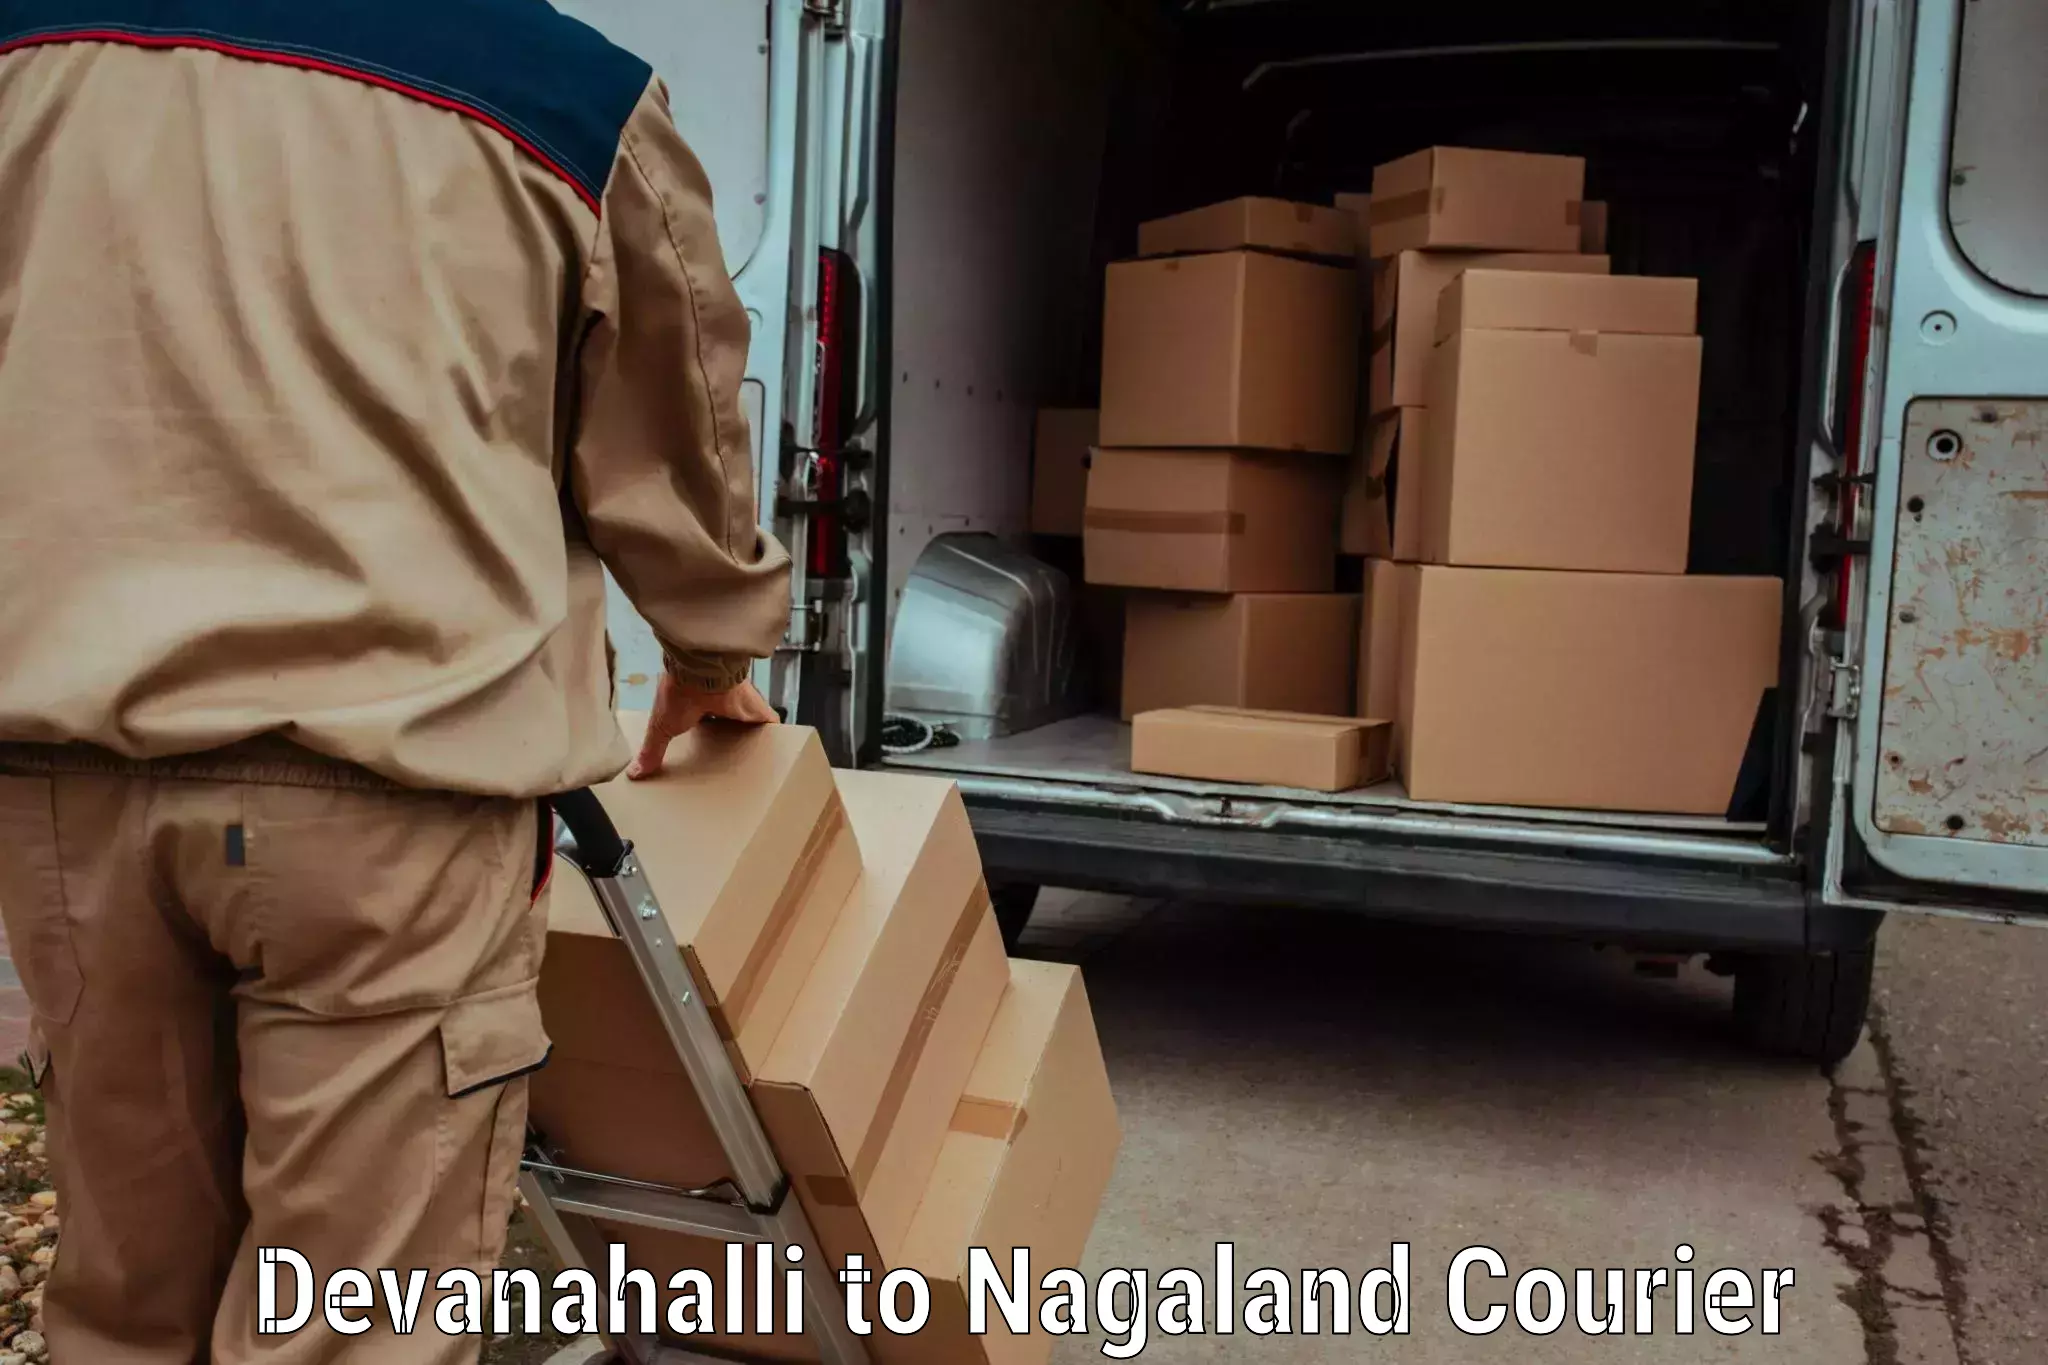 Cash on delivery service Devanahalli to NIT Nagaland